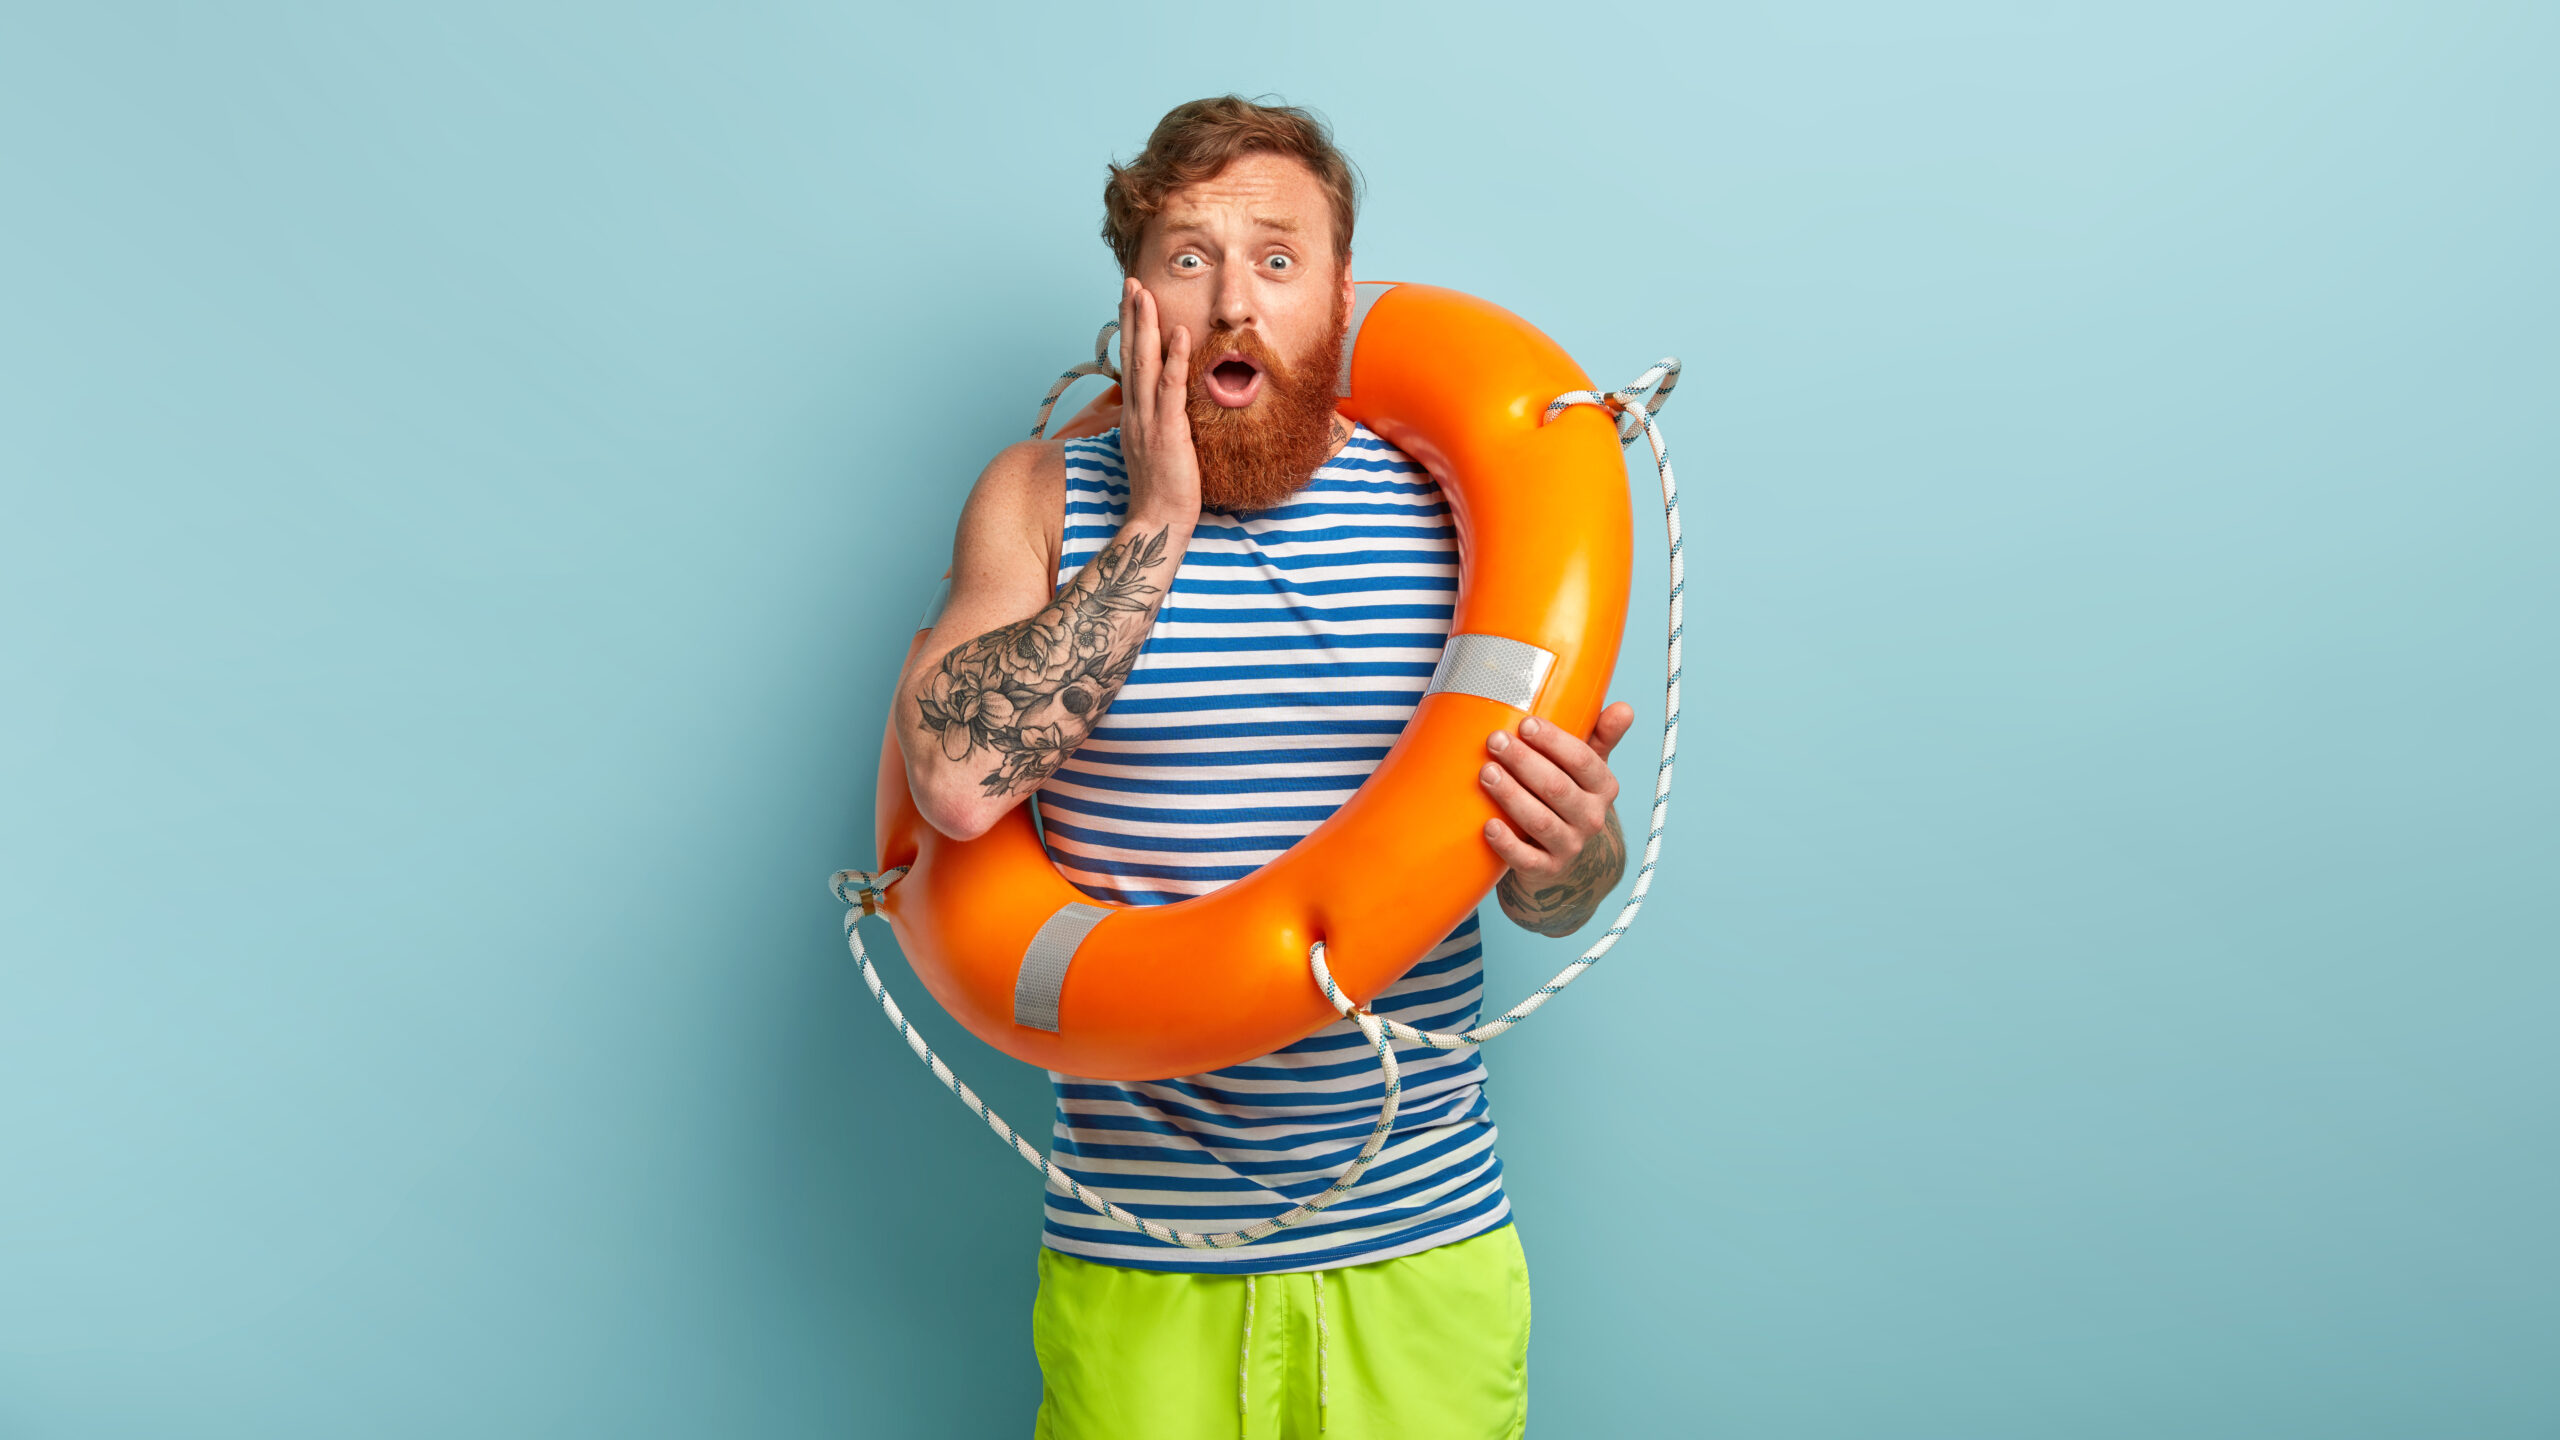 Impressed redhaired man has nervous facial expression, afraids of swimming in ocean for first time, uses ring buoy, wears striped white and blue t shirt, green shorts, cares about safety on water